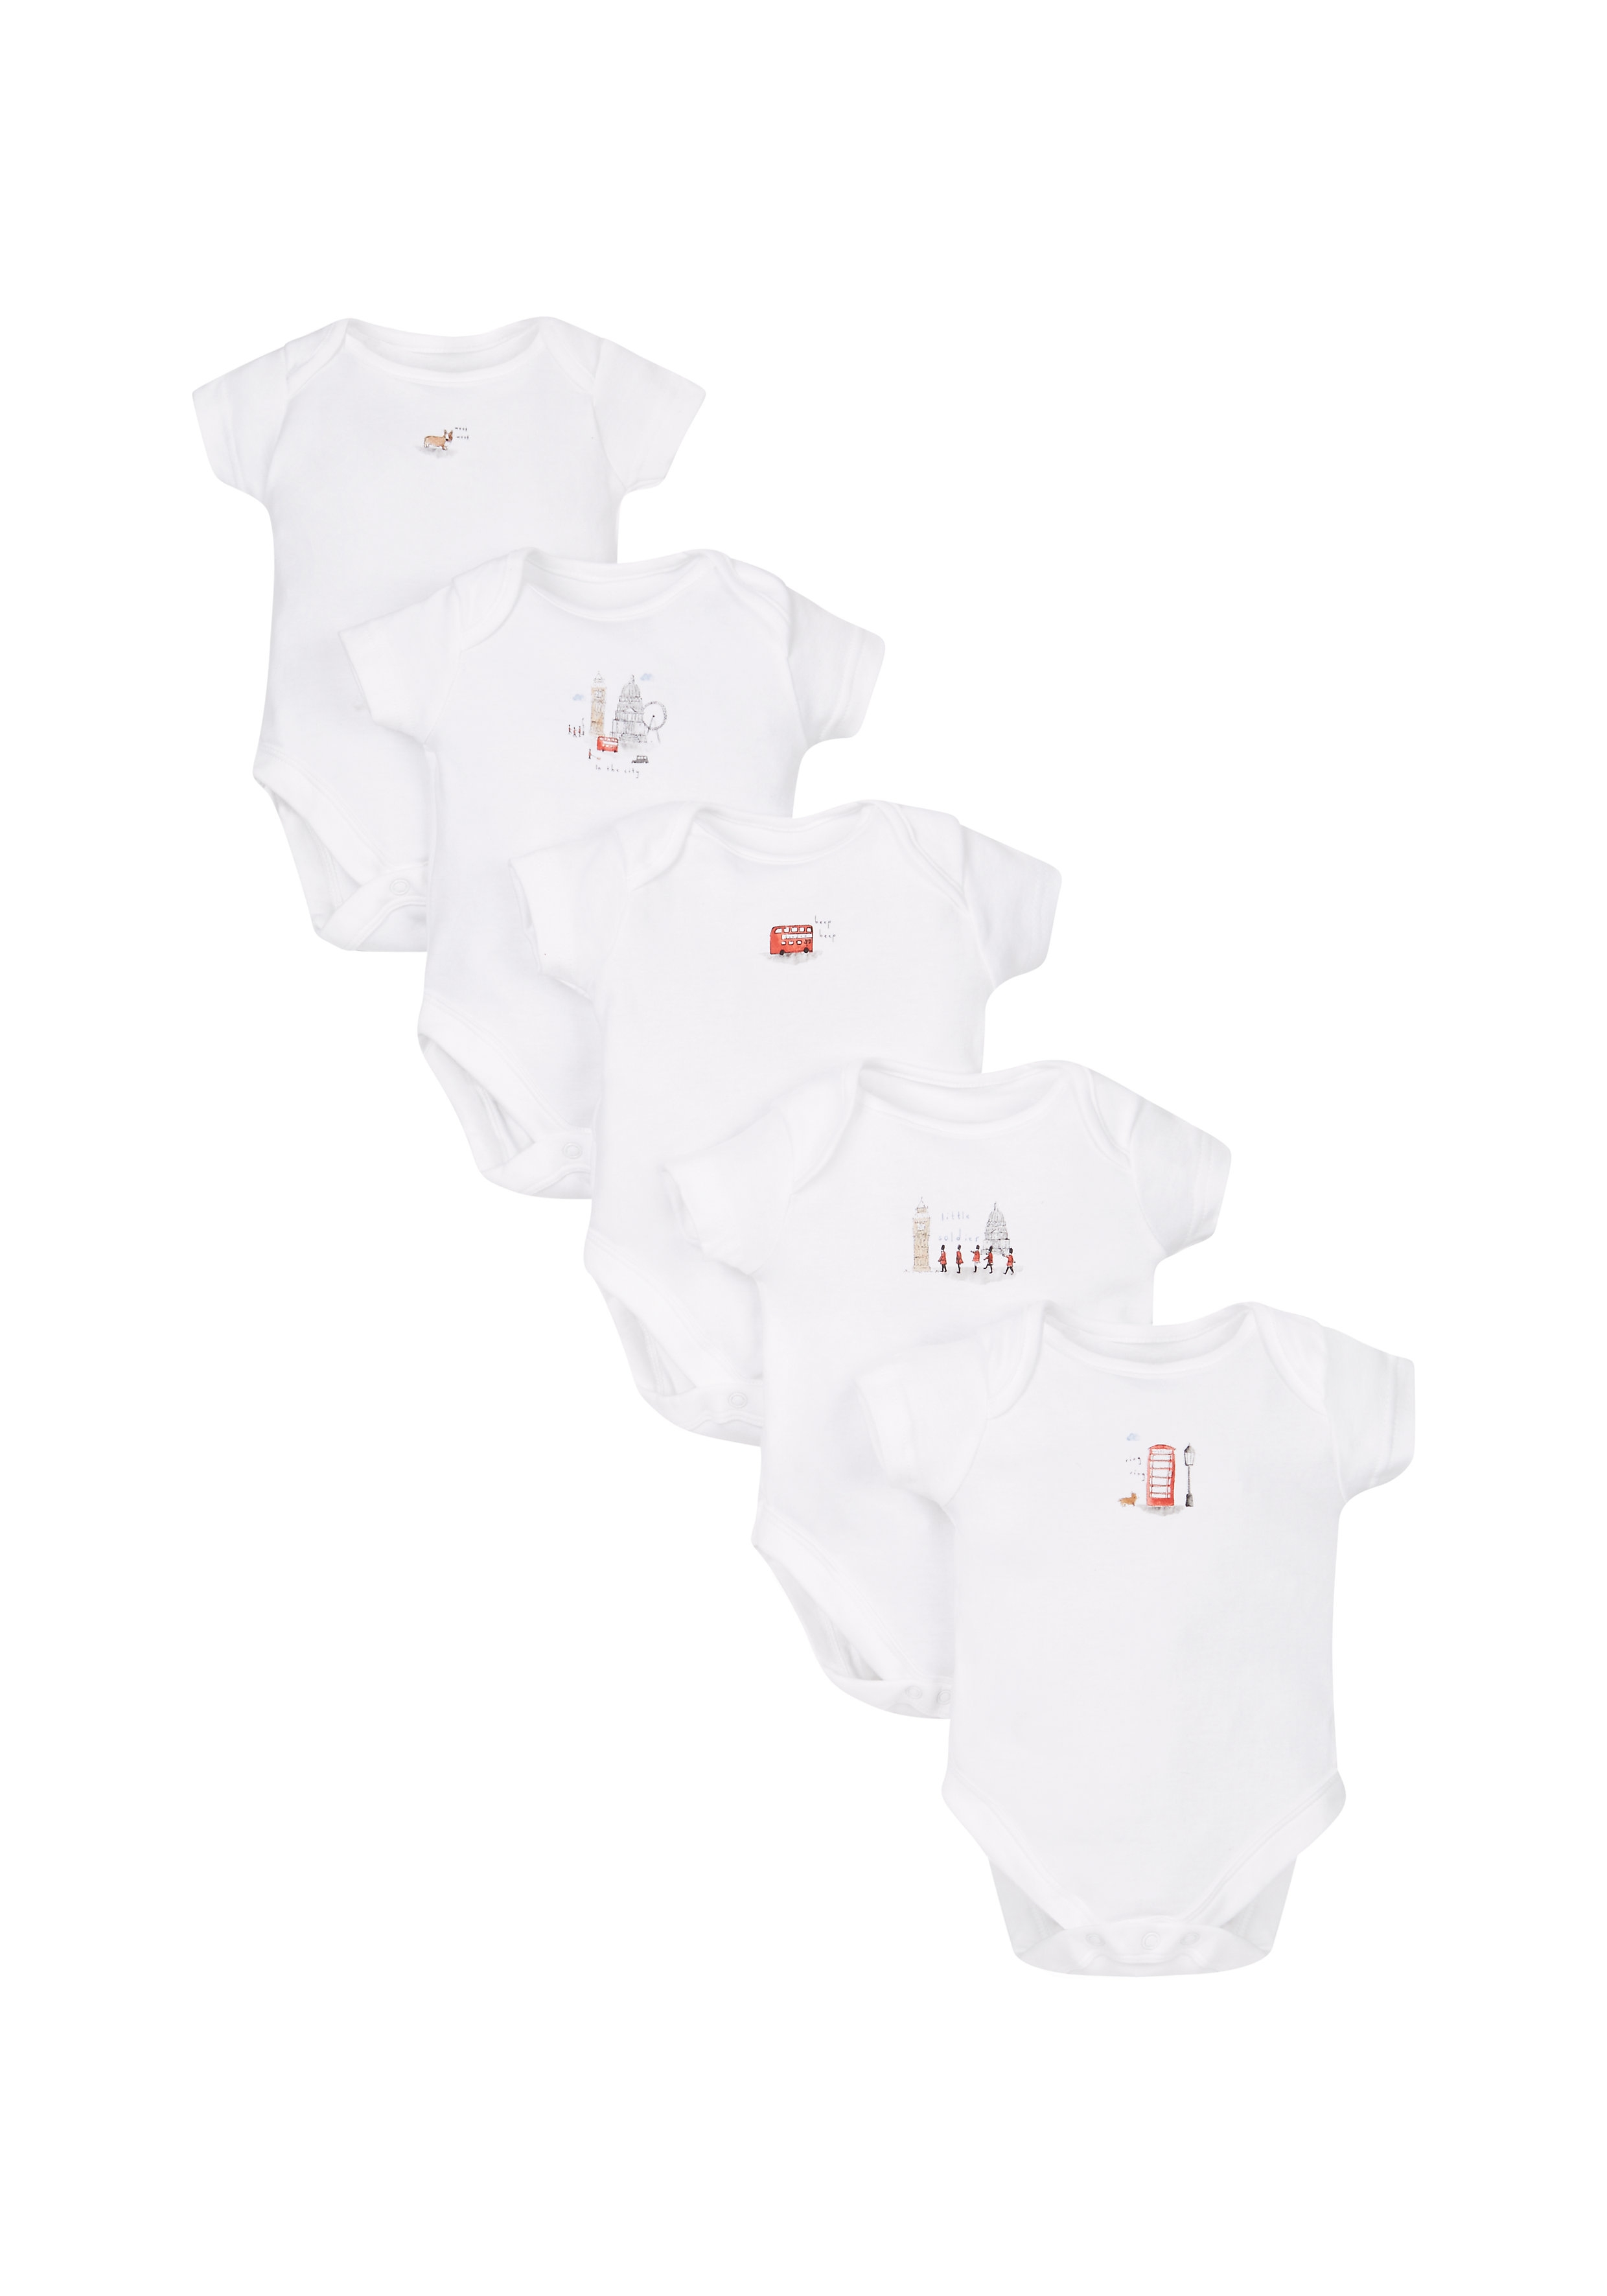 Mothercare | Unisex Half Sleeves Printed Bodysuits - Pack Of 5 - White 0